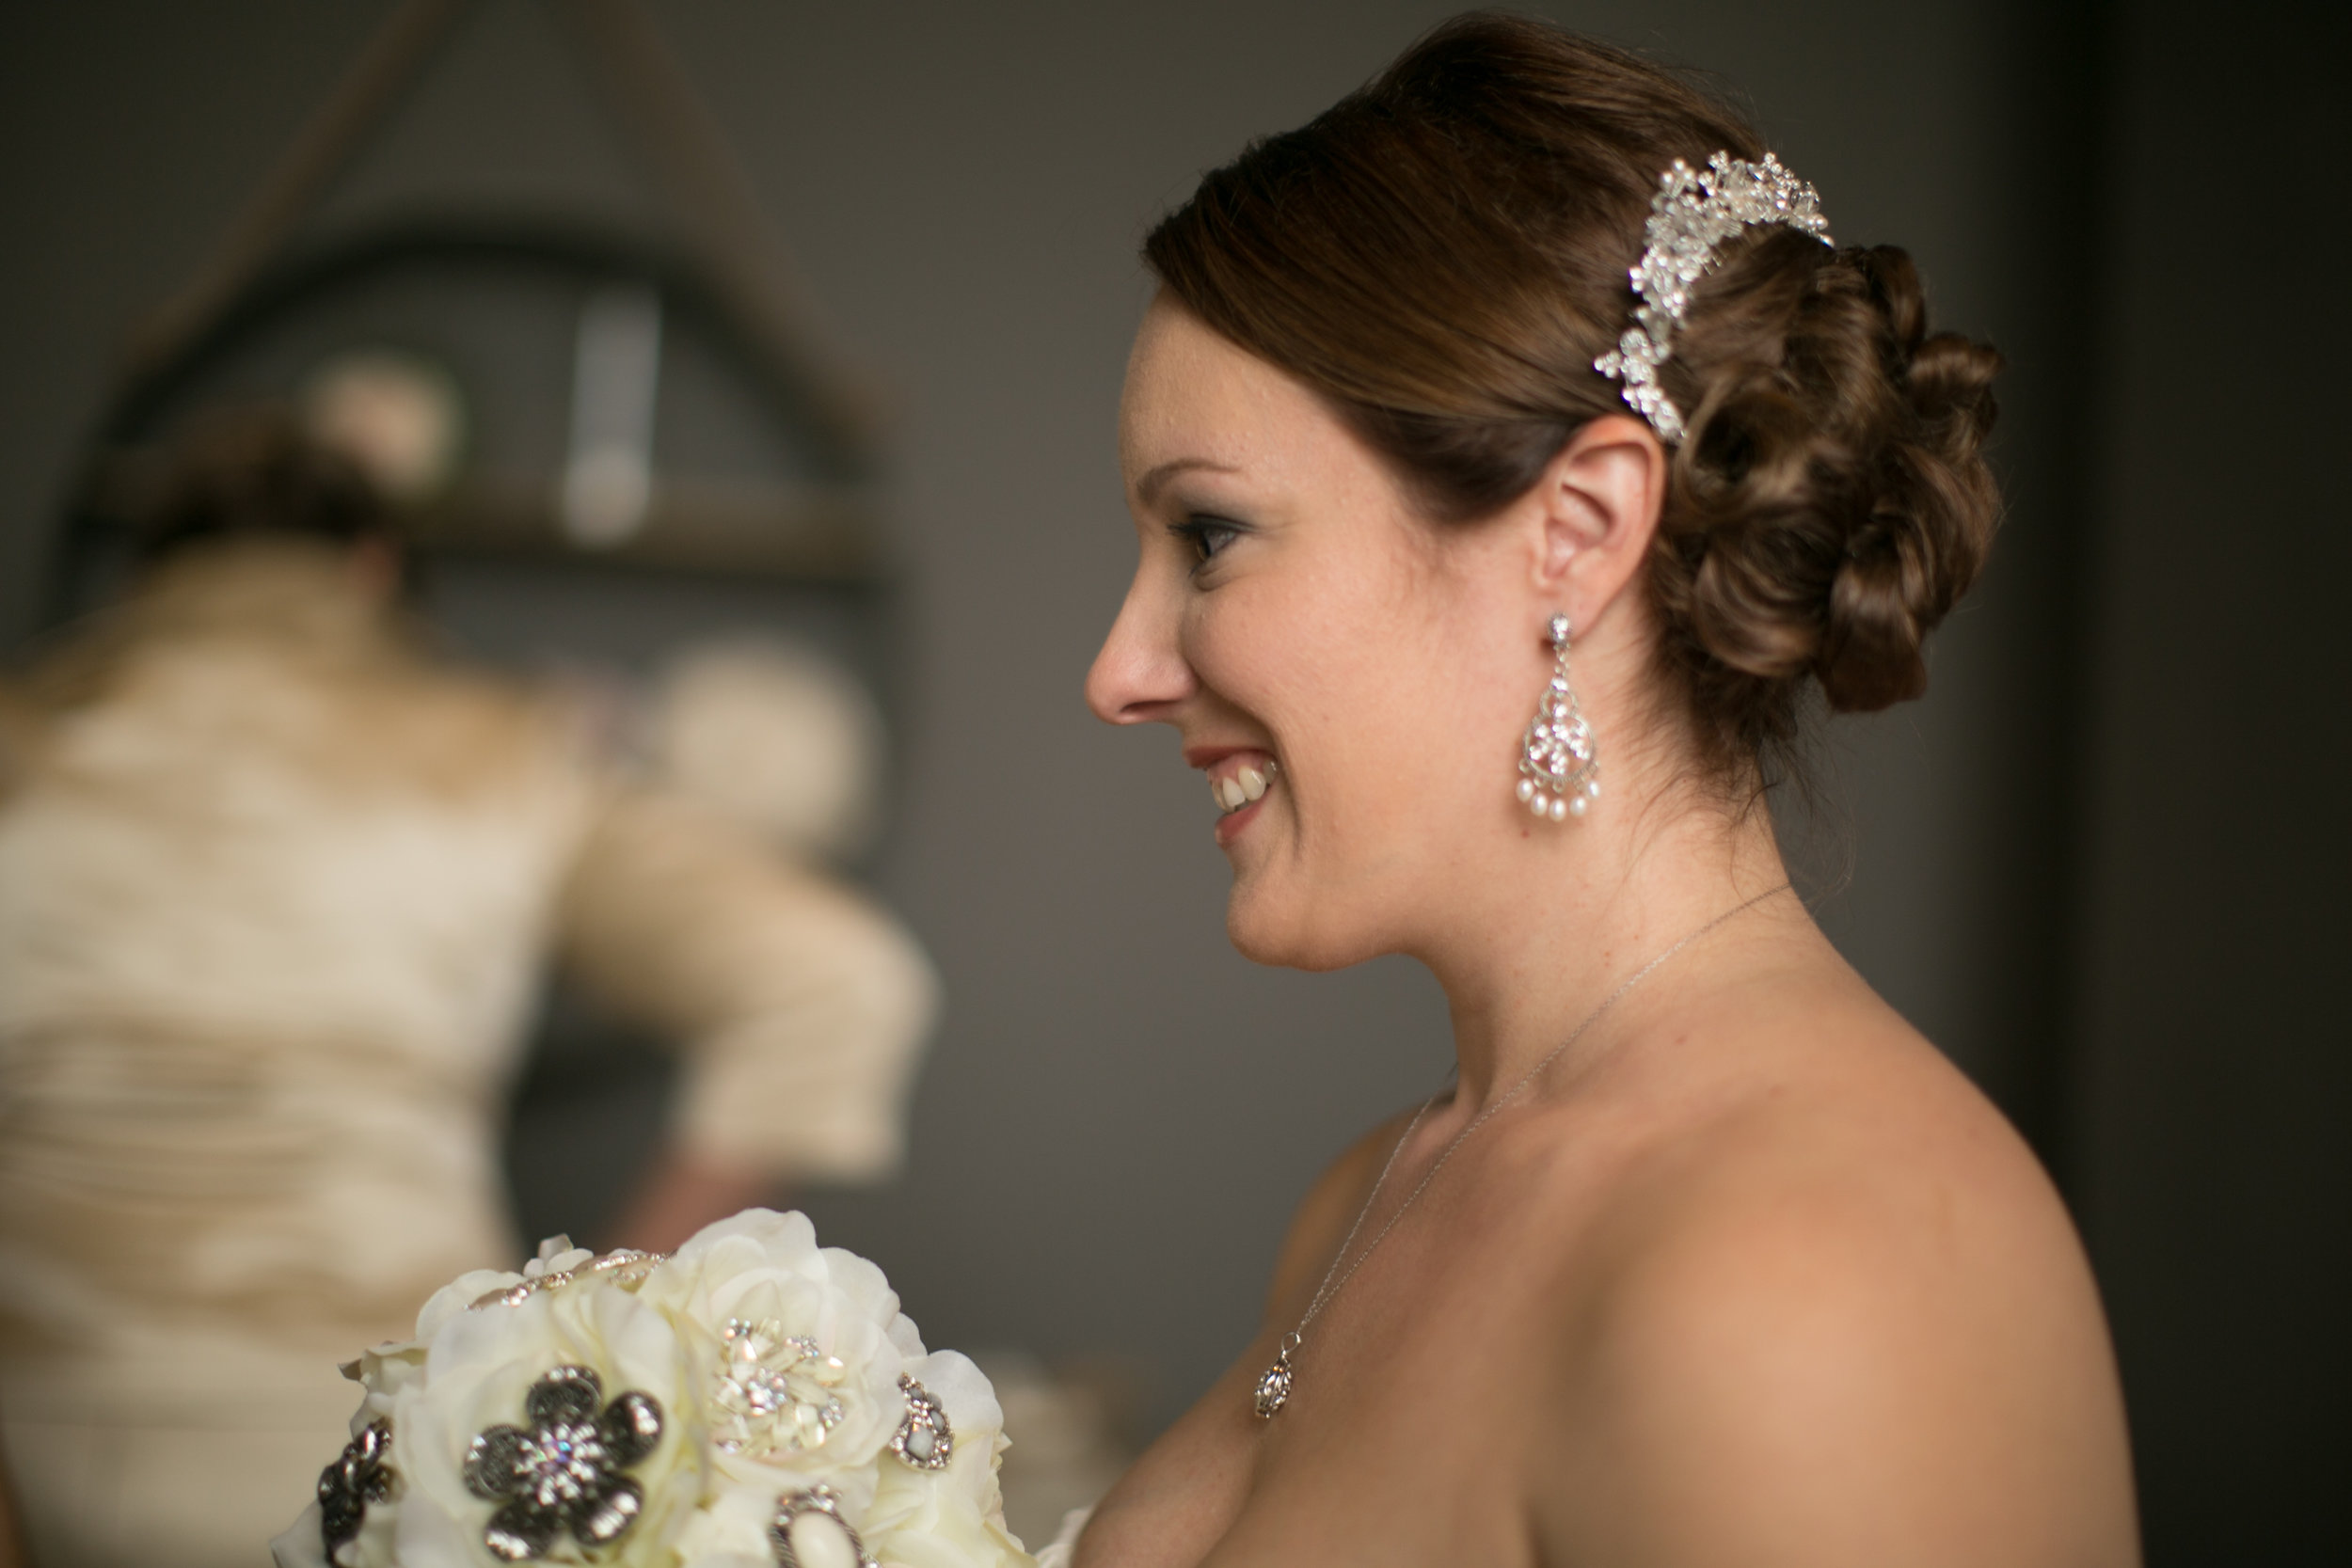 Sarah completed her look with chandelier earrings & a flashy hairpiece!